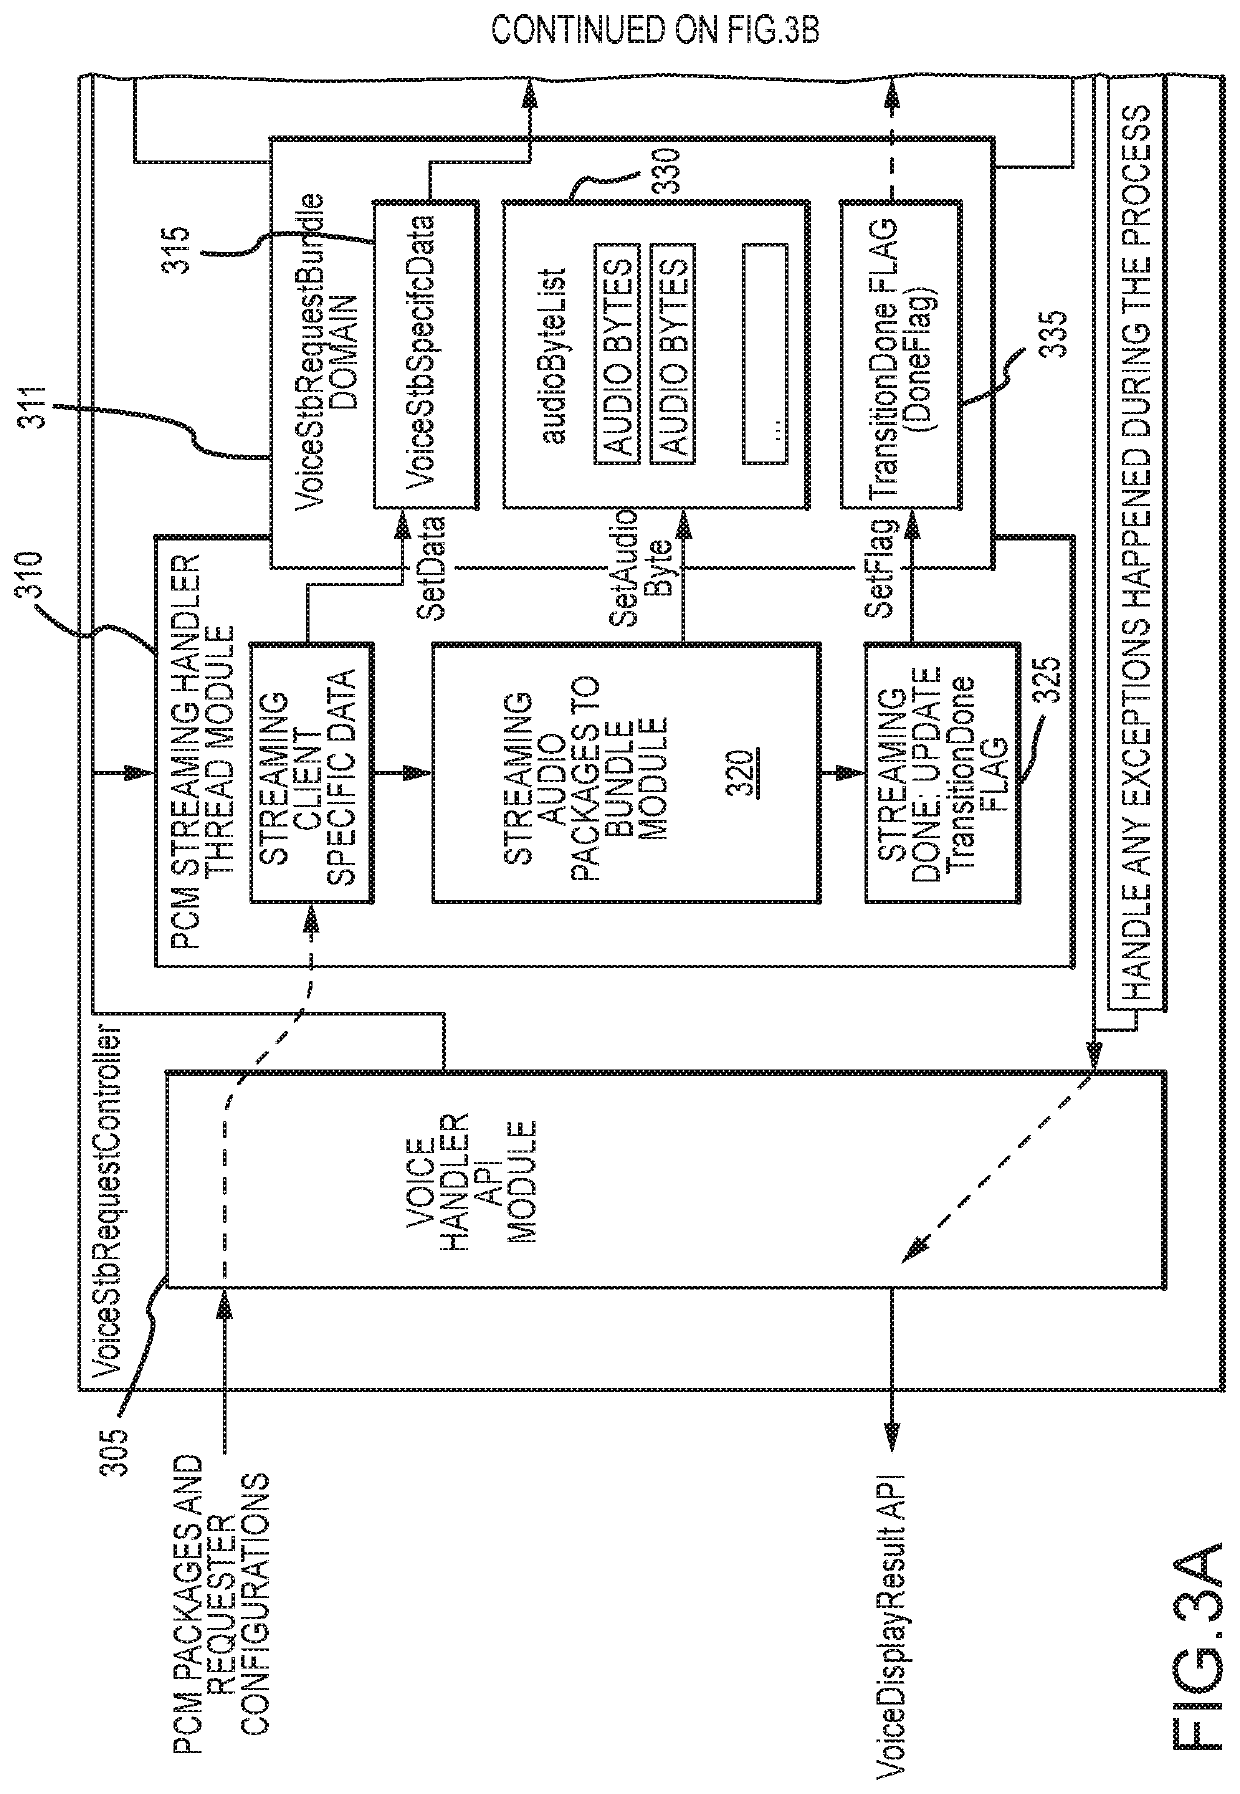 Method and system for implementing an elastic cloud-based voice search utilized by set-top box (STB) clients